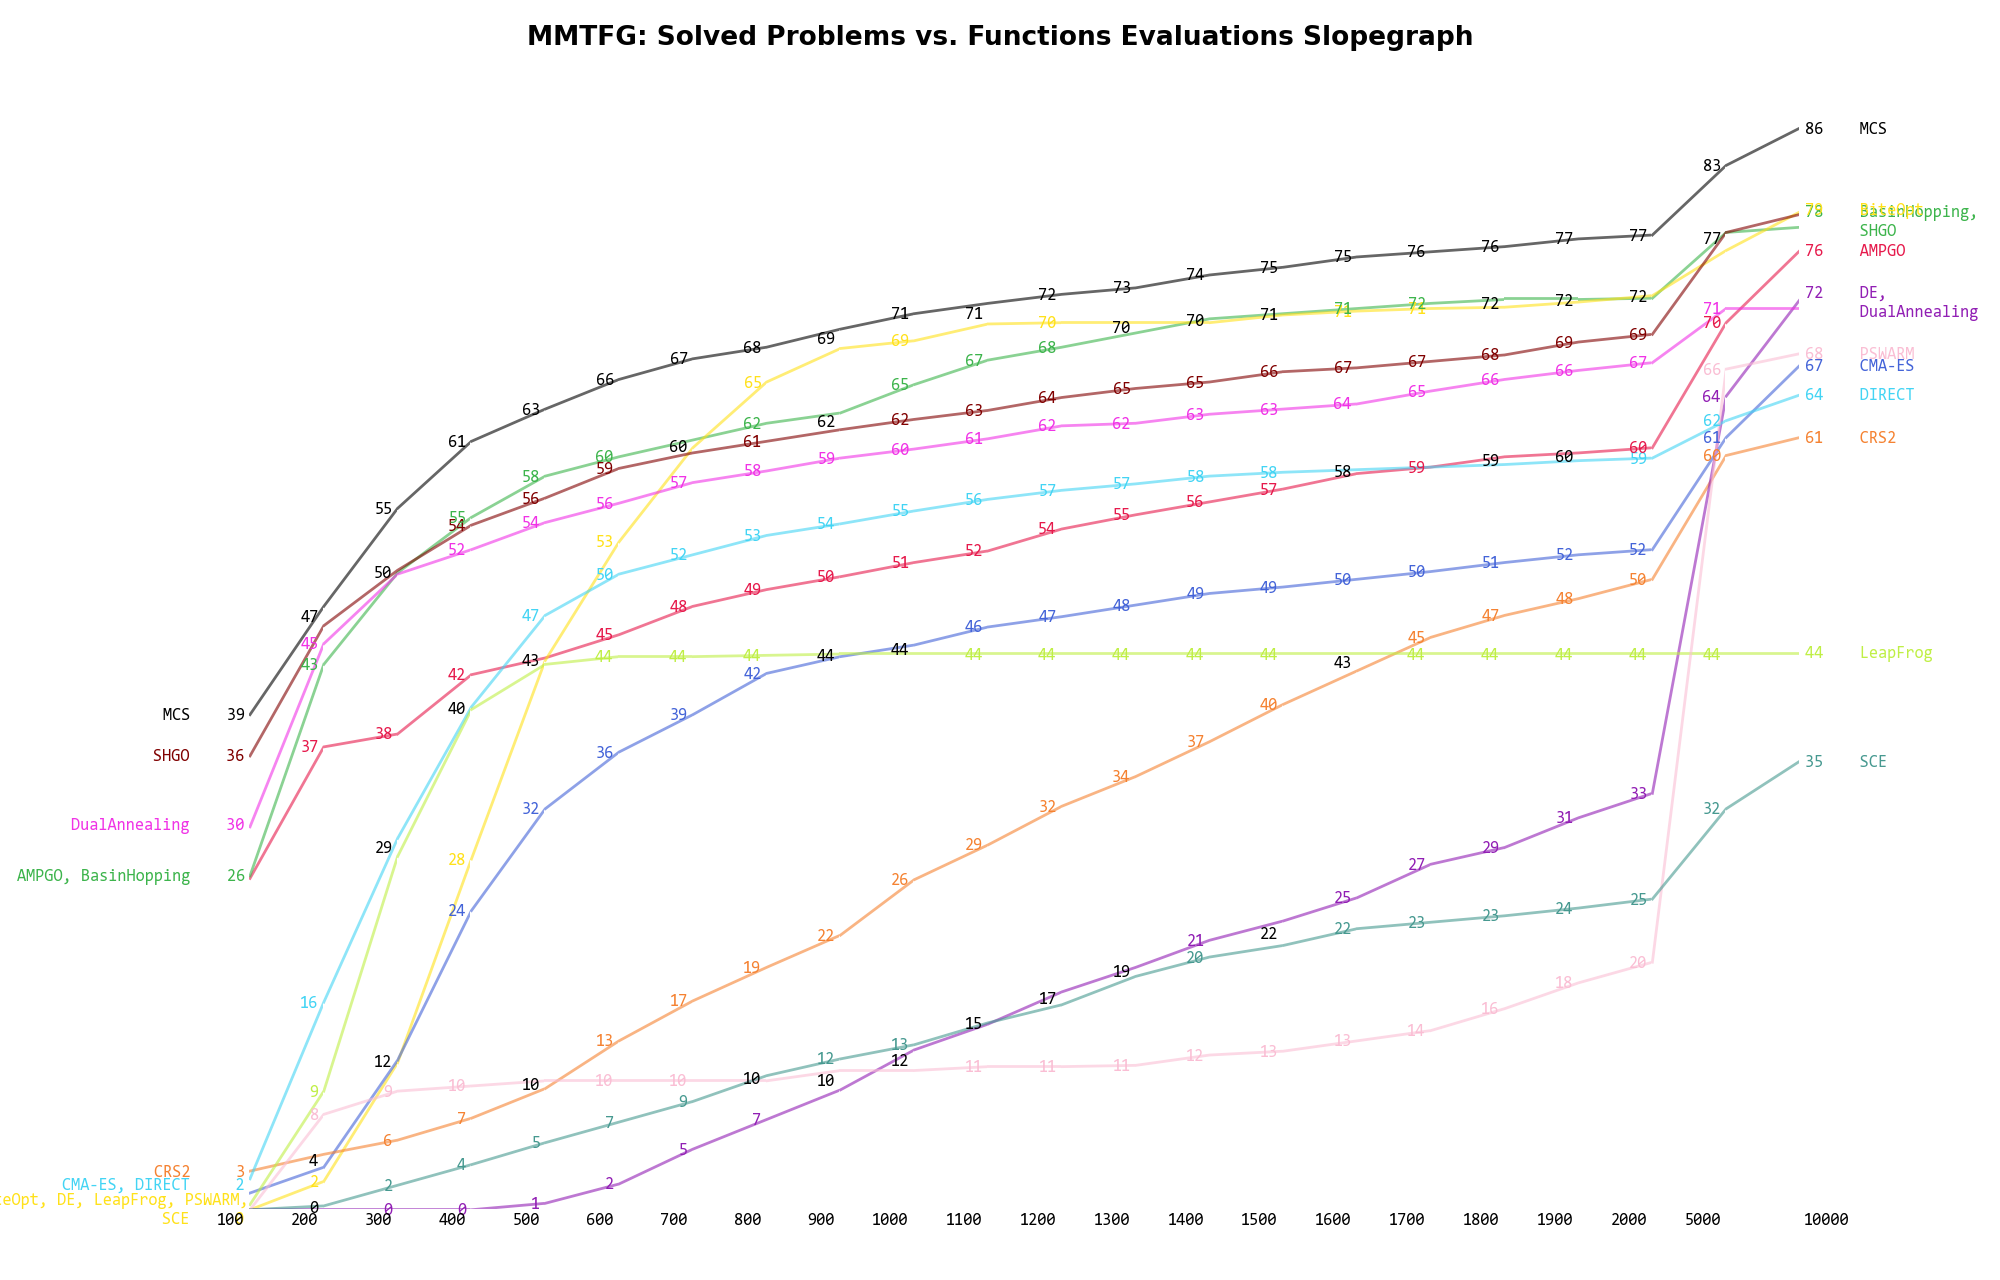 Percentage of problems solved given a fixed number of function evaluations on the MMTFG test suite